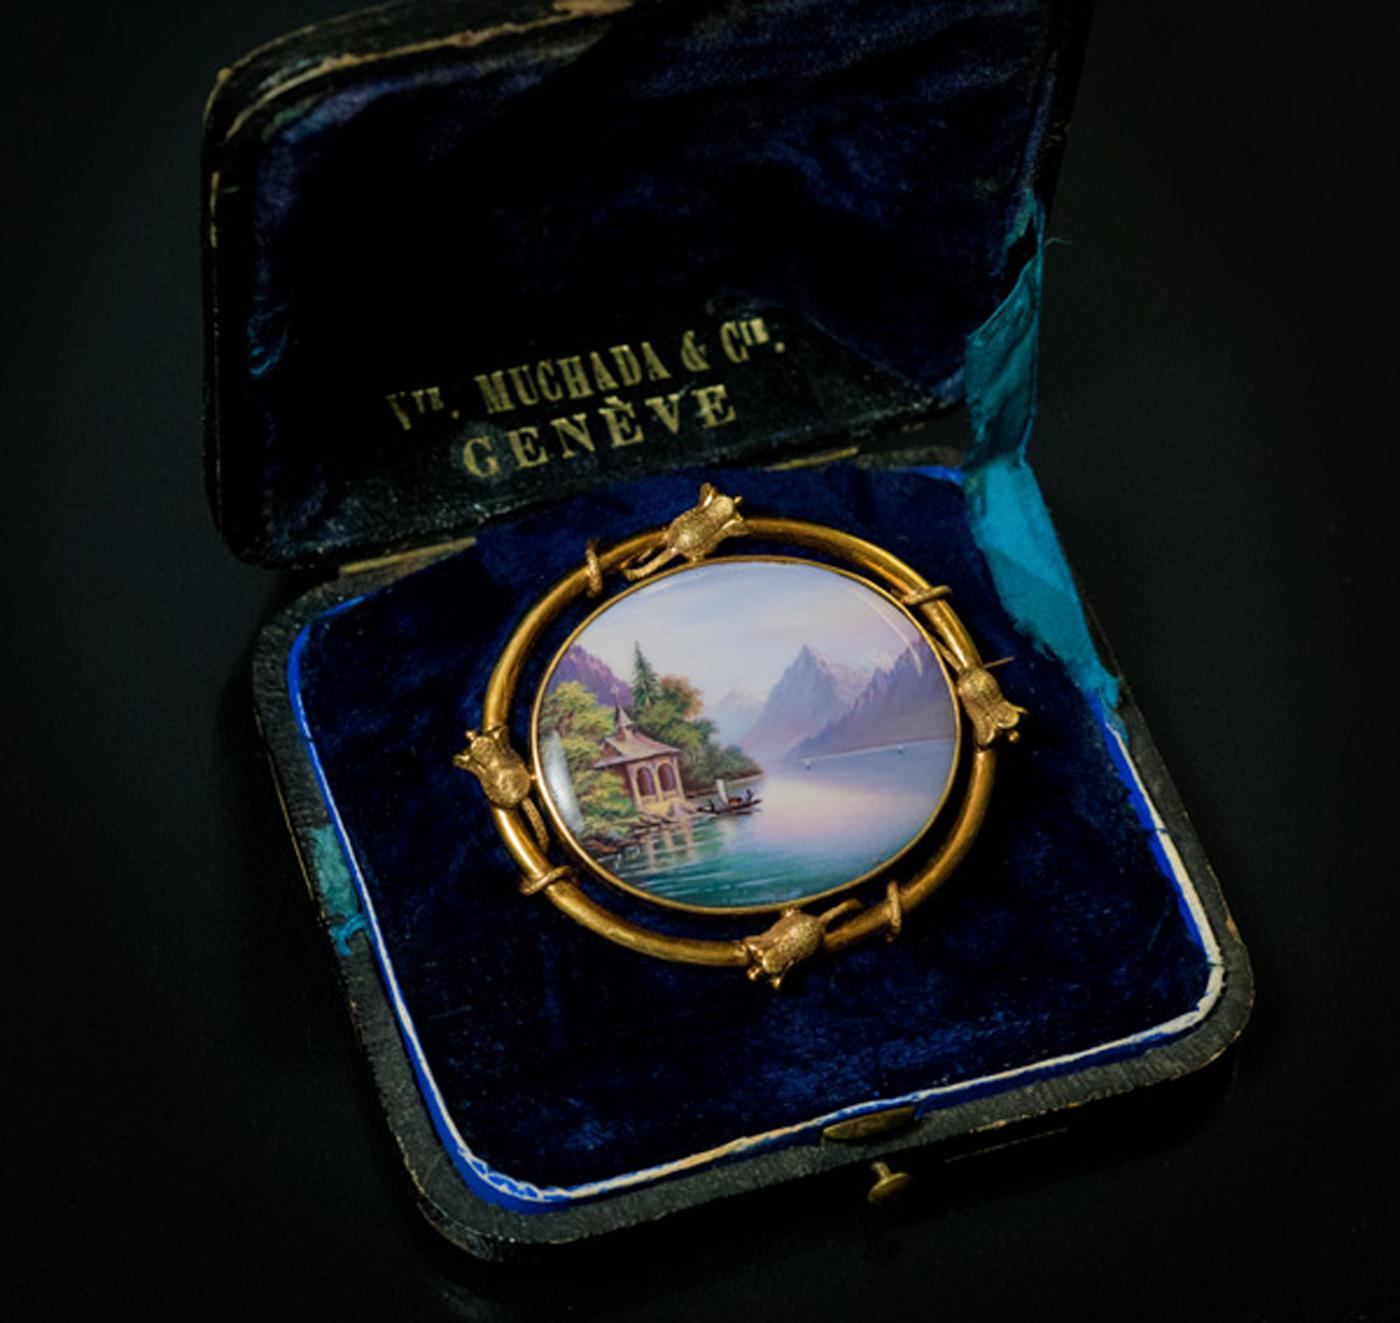 Geneva, Switzerland, circa 1850

An antique Swiss 18K gold brooch features an oval glossy enamel plaque finely painted with a view of Lake Lucerne after the 1844 painting by Thomas Miles Richardson Lake Lucerne With William Tell’s Chapel.  The